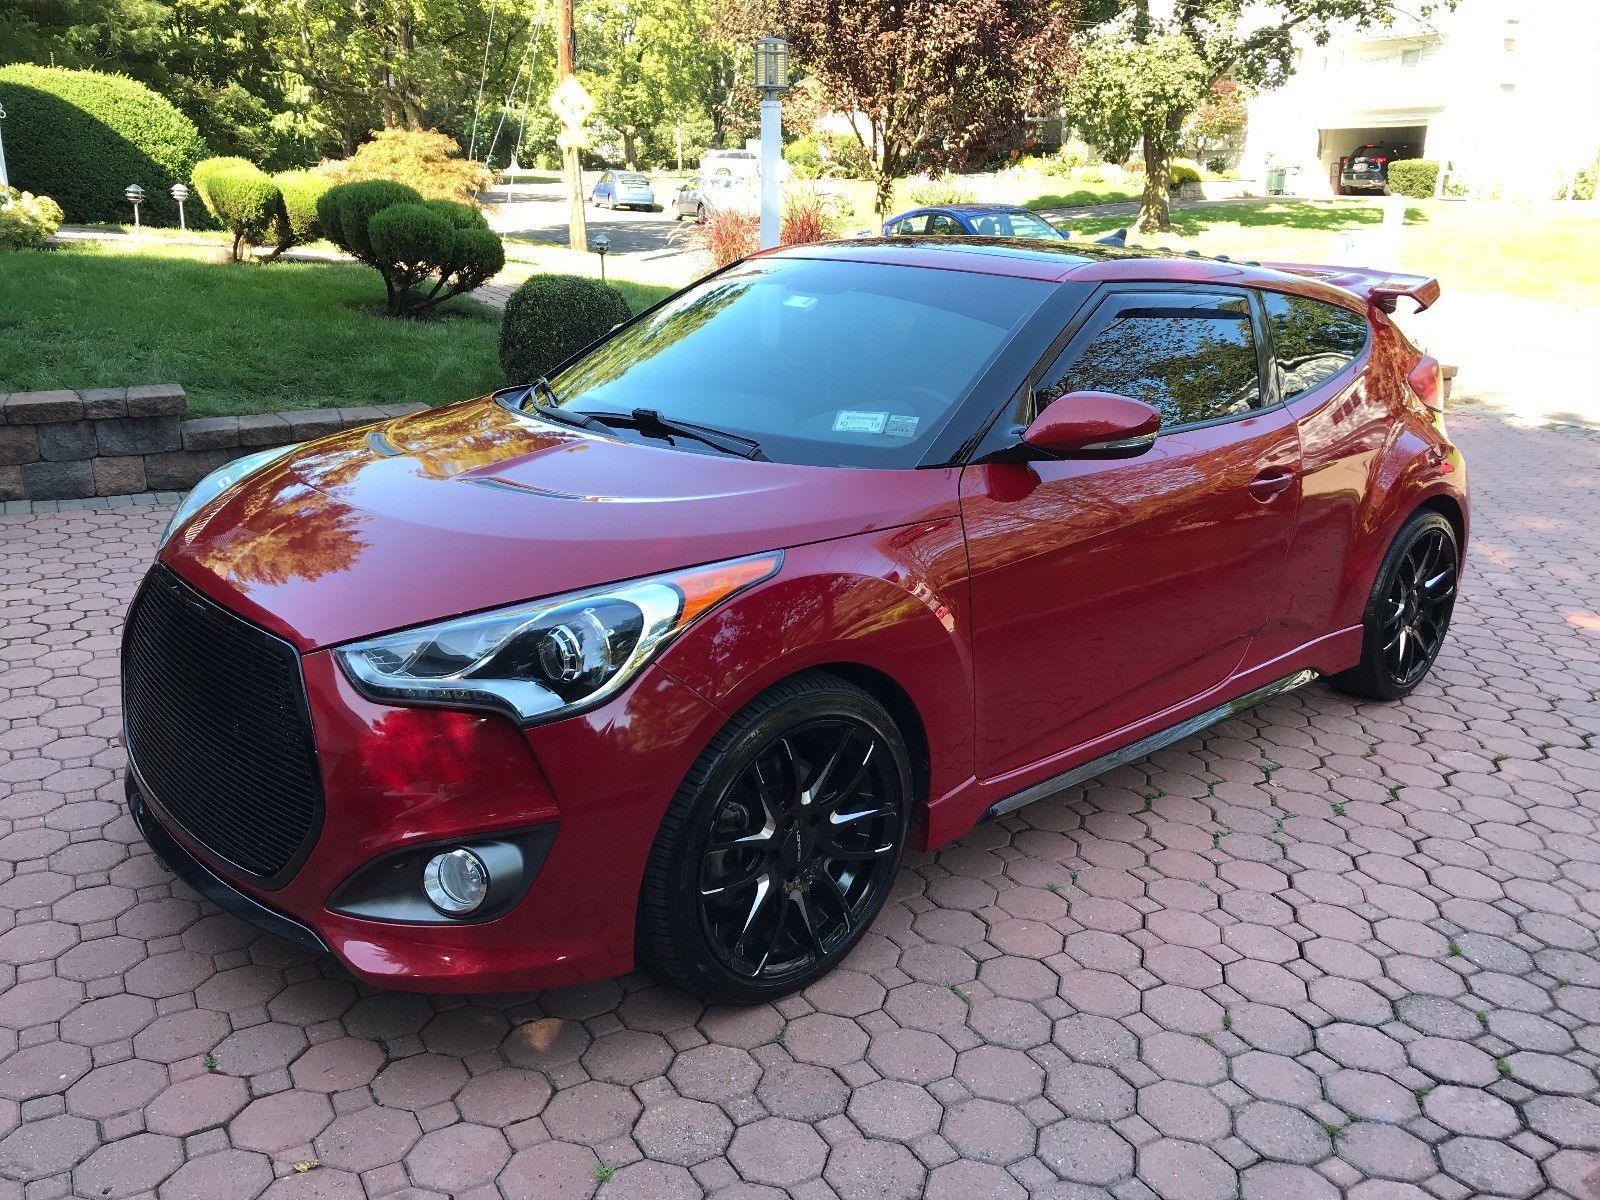 Awesome Amazing 2013 Hyundai Veloster Turbo Hyundai Veloster Turbo 2013 Red  41k Miles Clean Title Good Condition 2018 C… | Hyundai veloster, Veloster  turbo, Hyundai